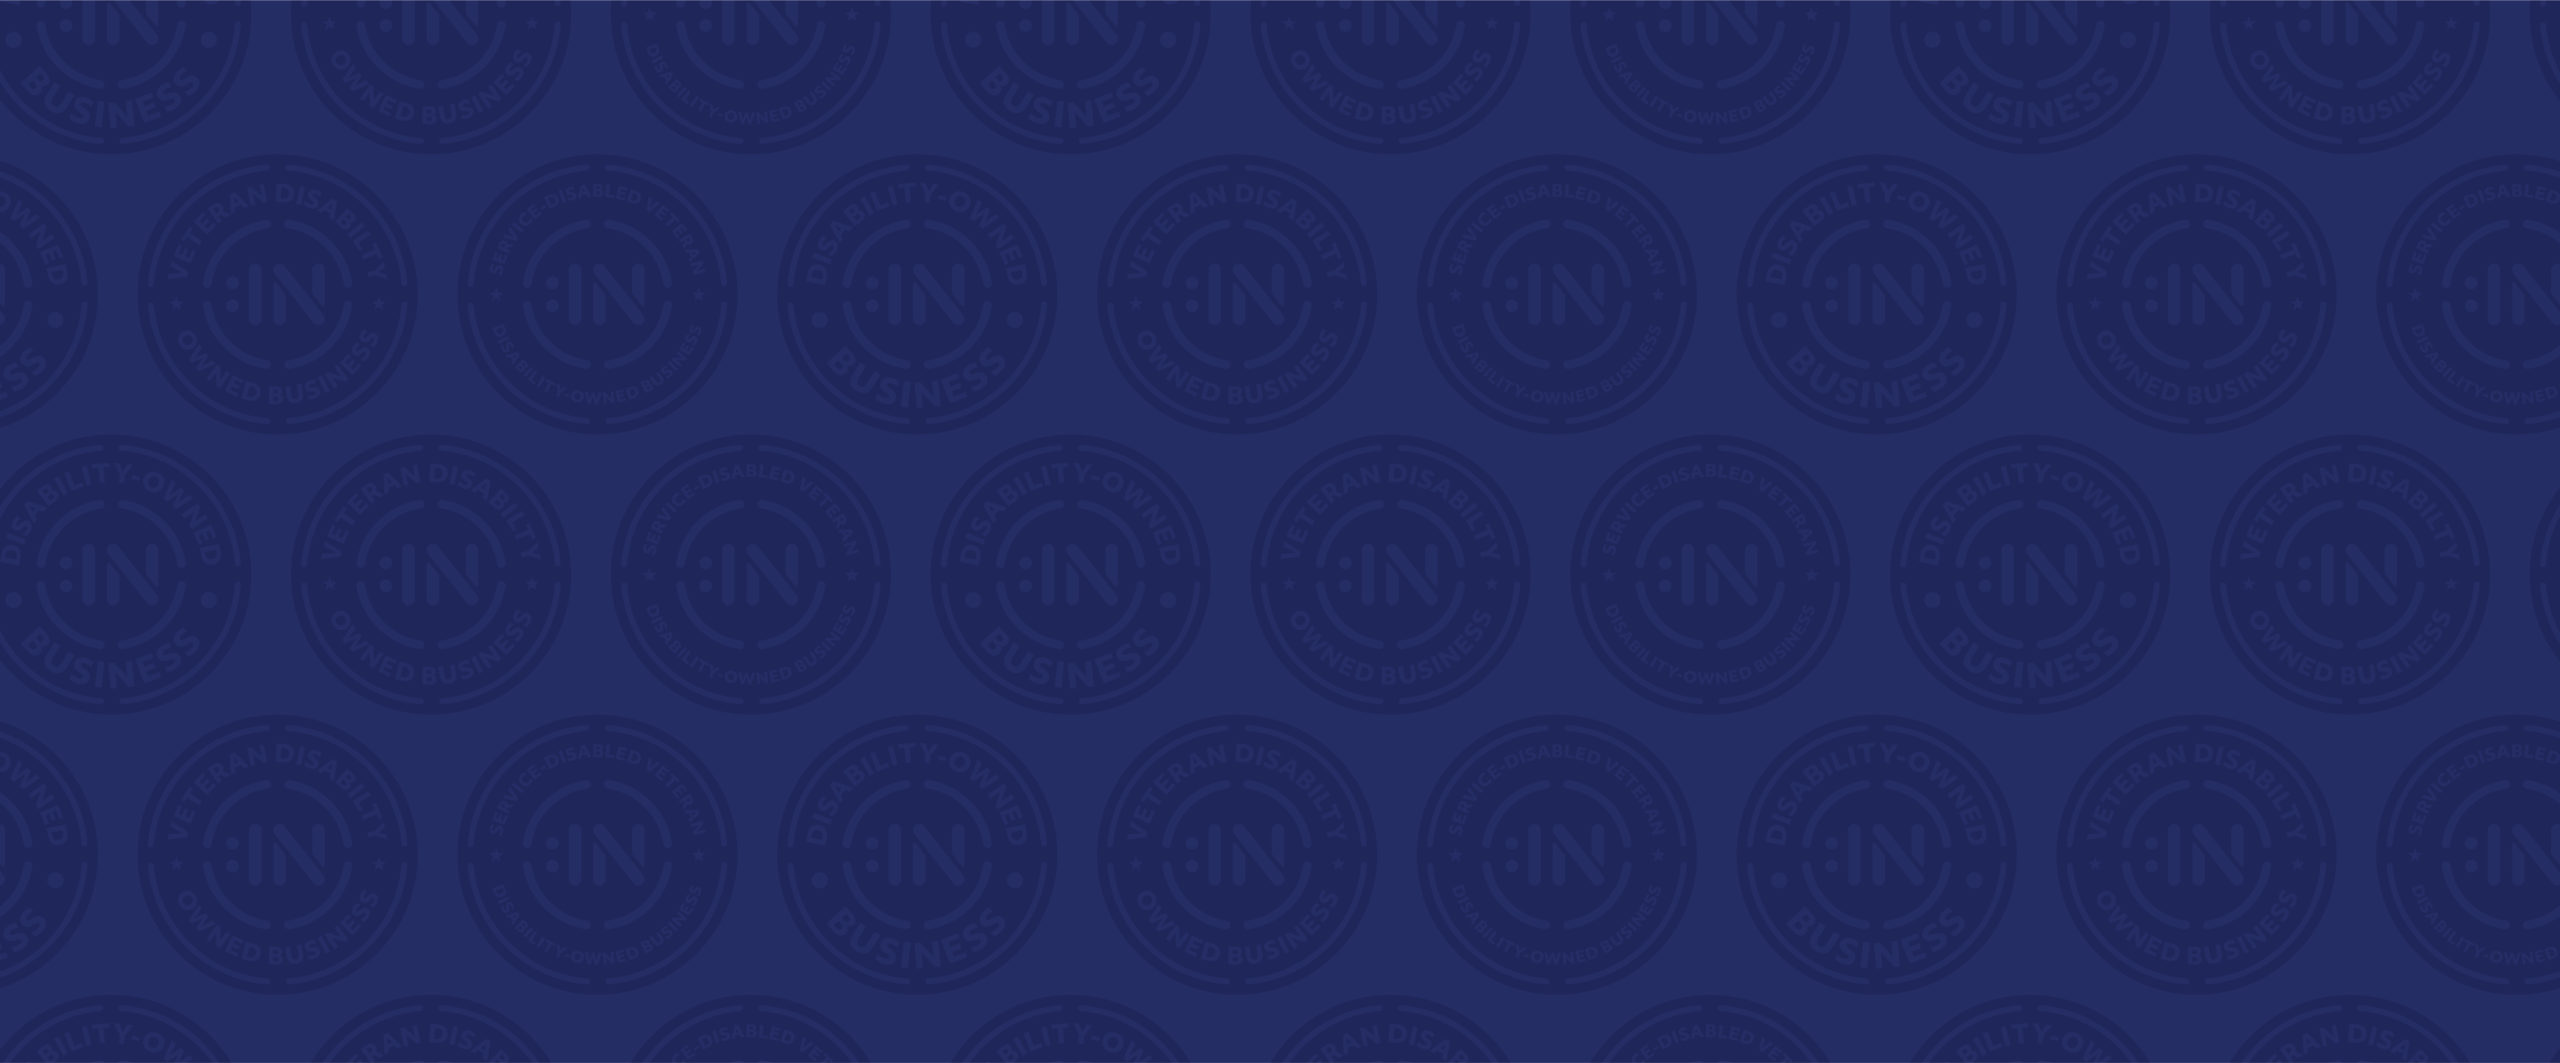 Patterned repeated DOBE logos in a navy blue background